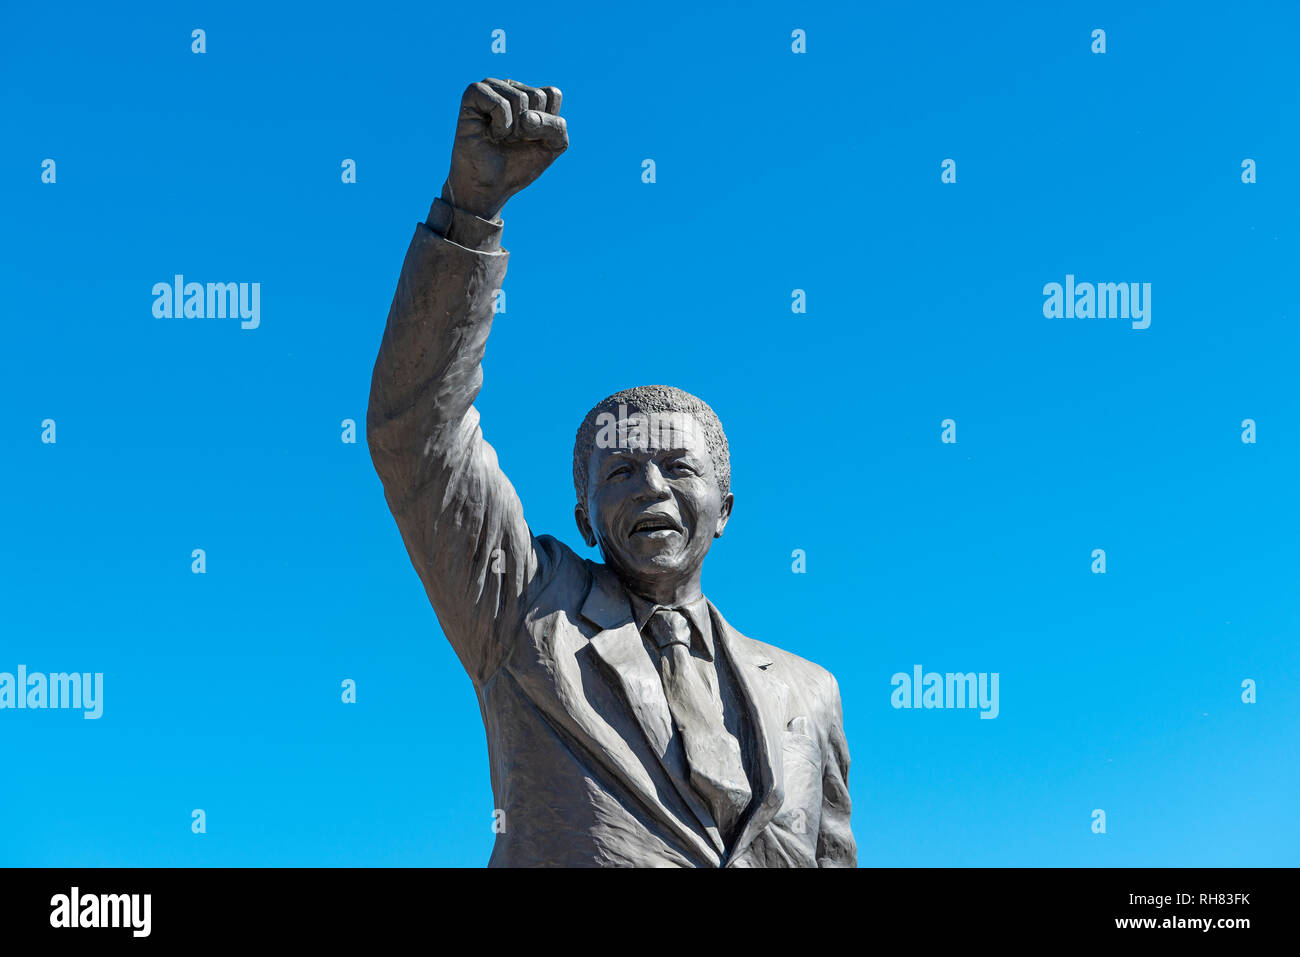 Statue of Nelson Mandela with raised fist near Drakenstein Correctional Centre, Cape Town, South Africa. Stock Photo